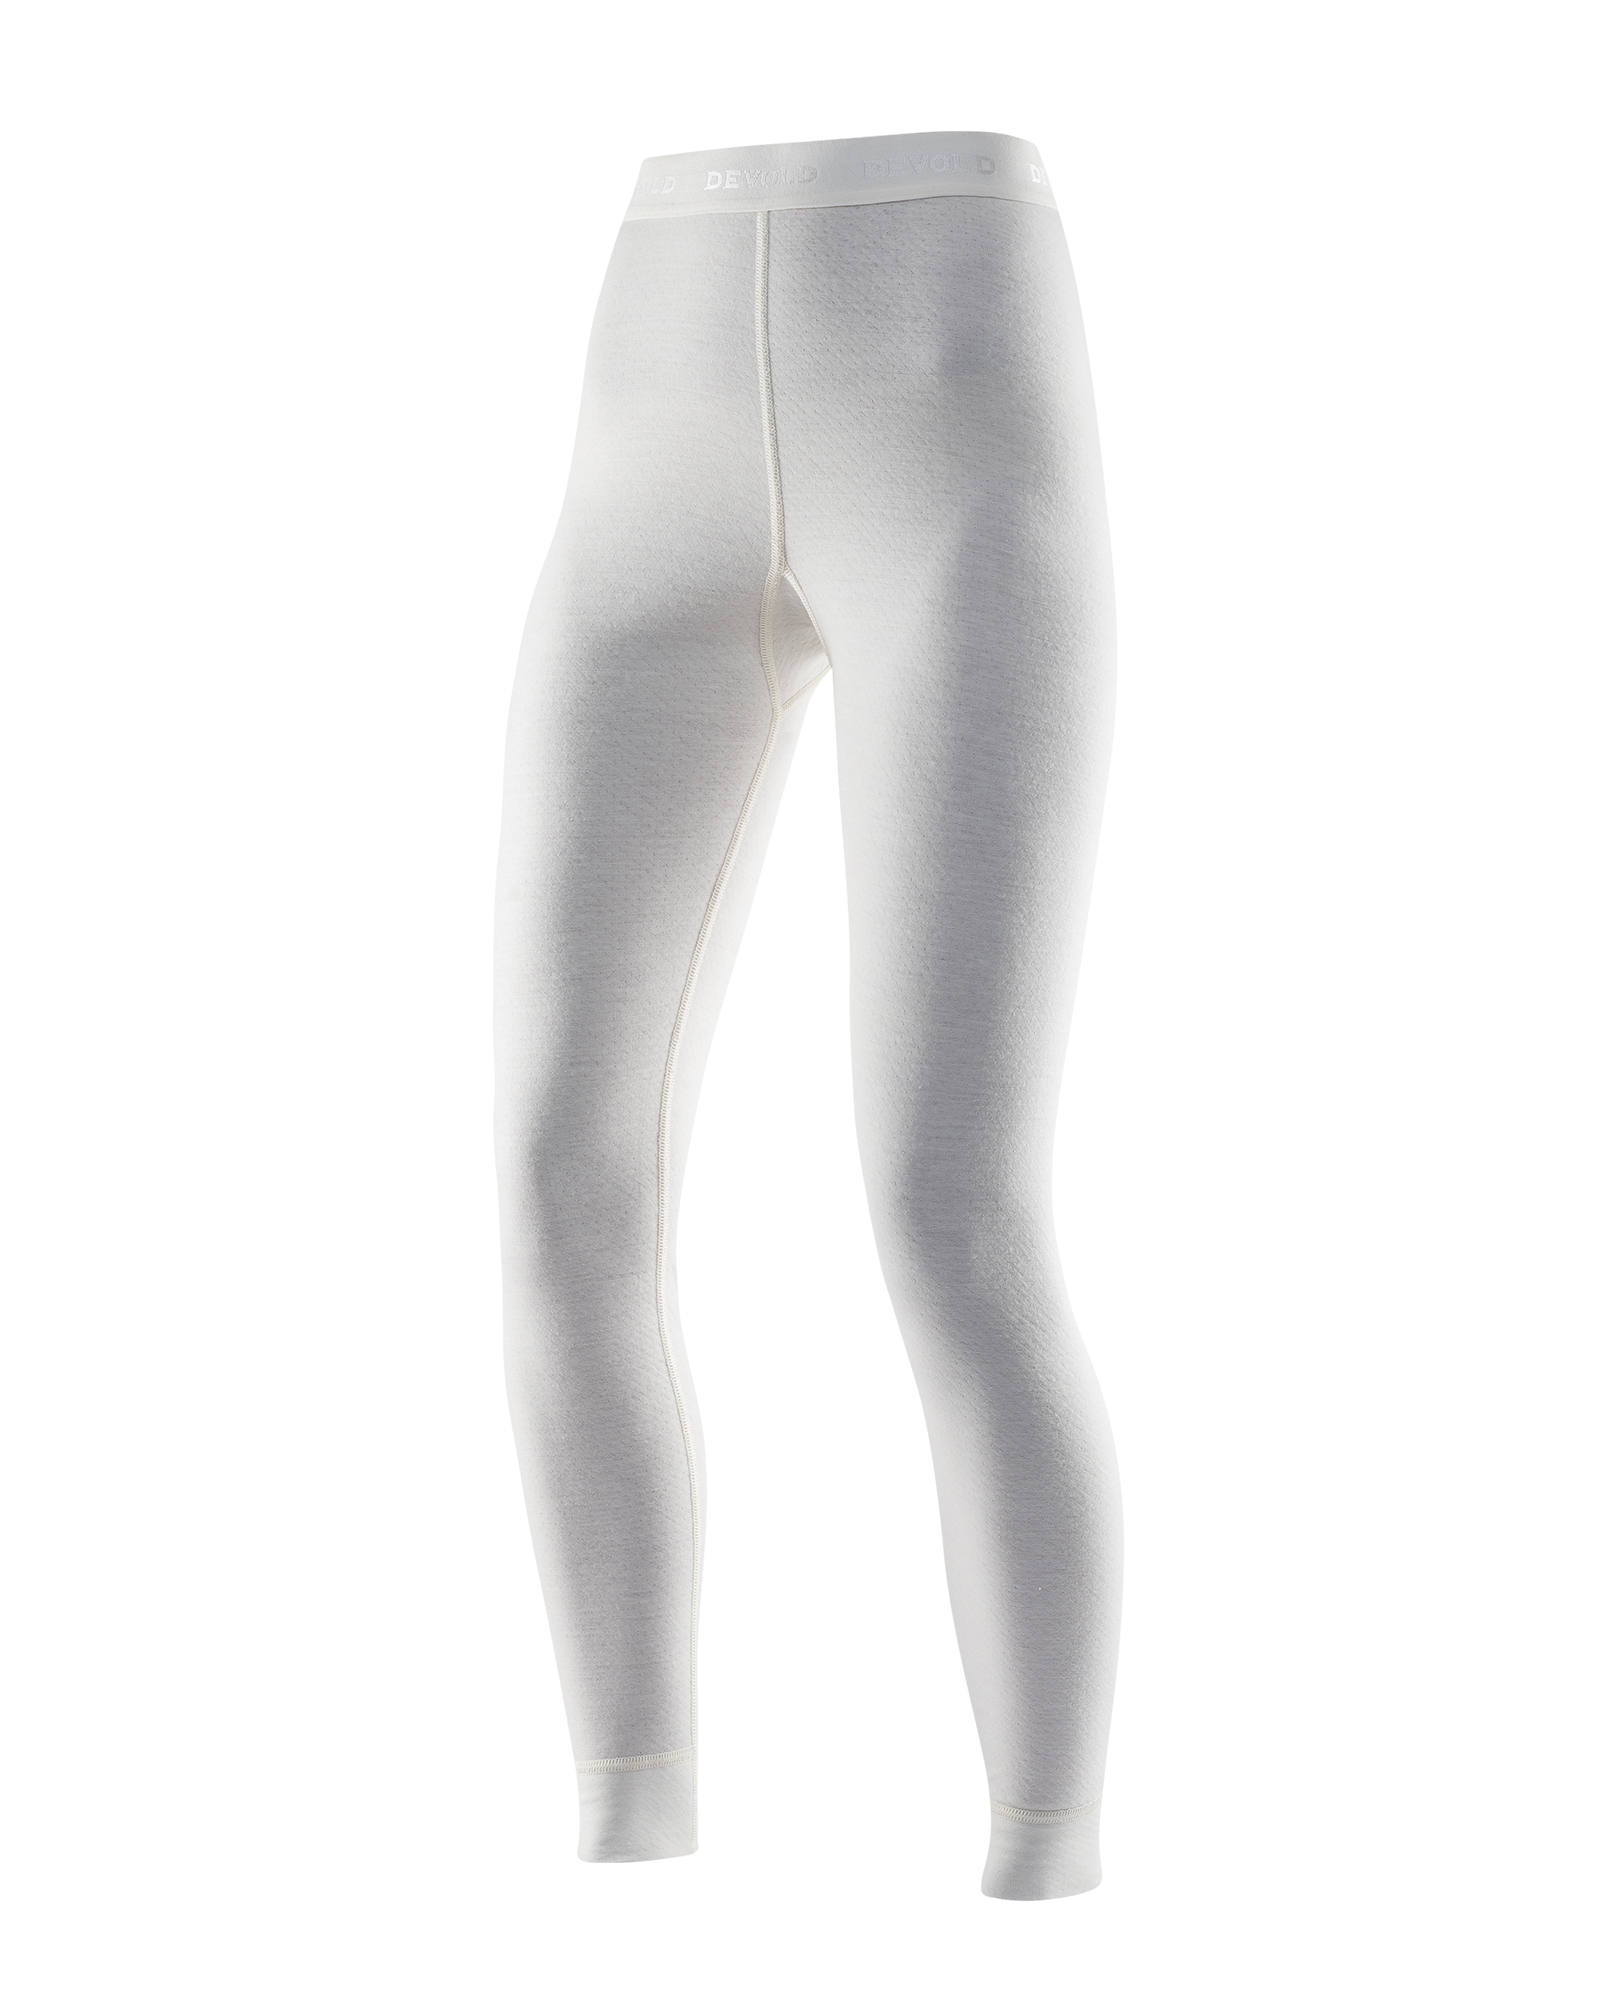 Devold Duo Active Woman Long Johns - Offwhite